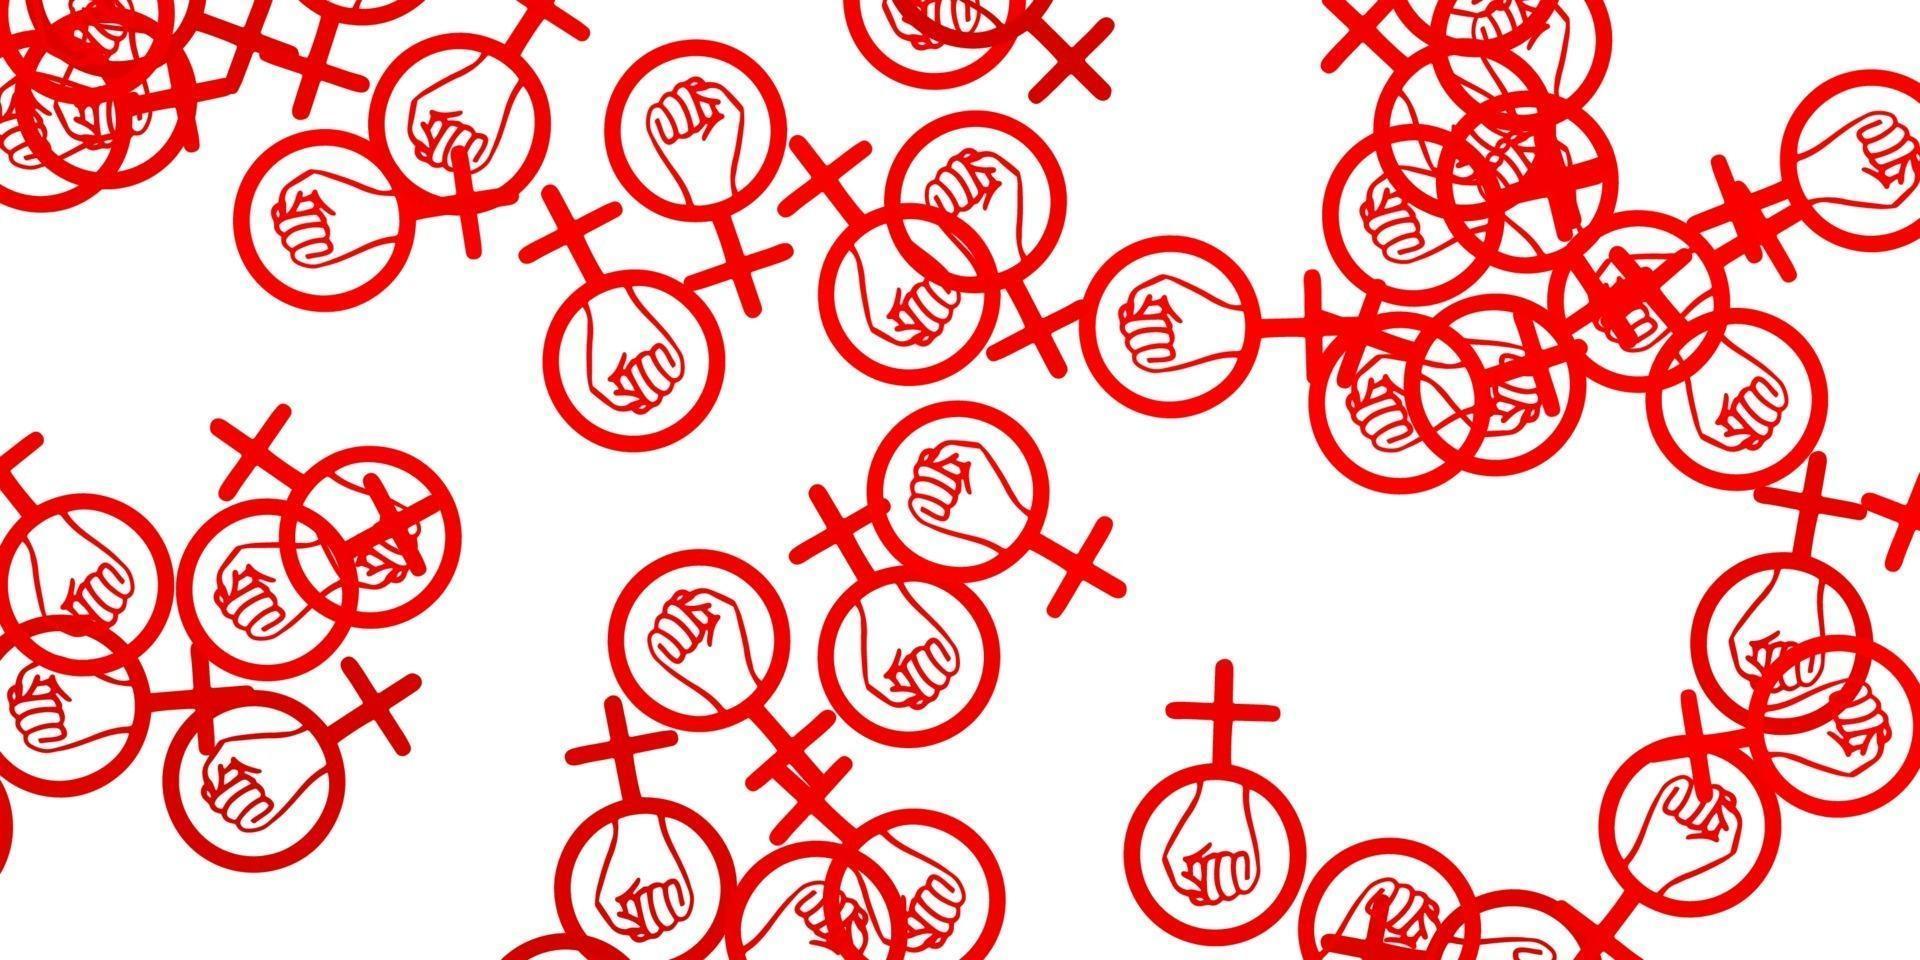 Light Red vector backdrop with woman's power symbols.